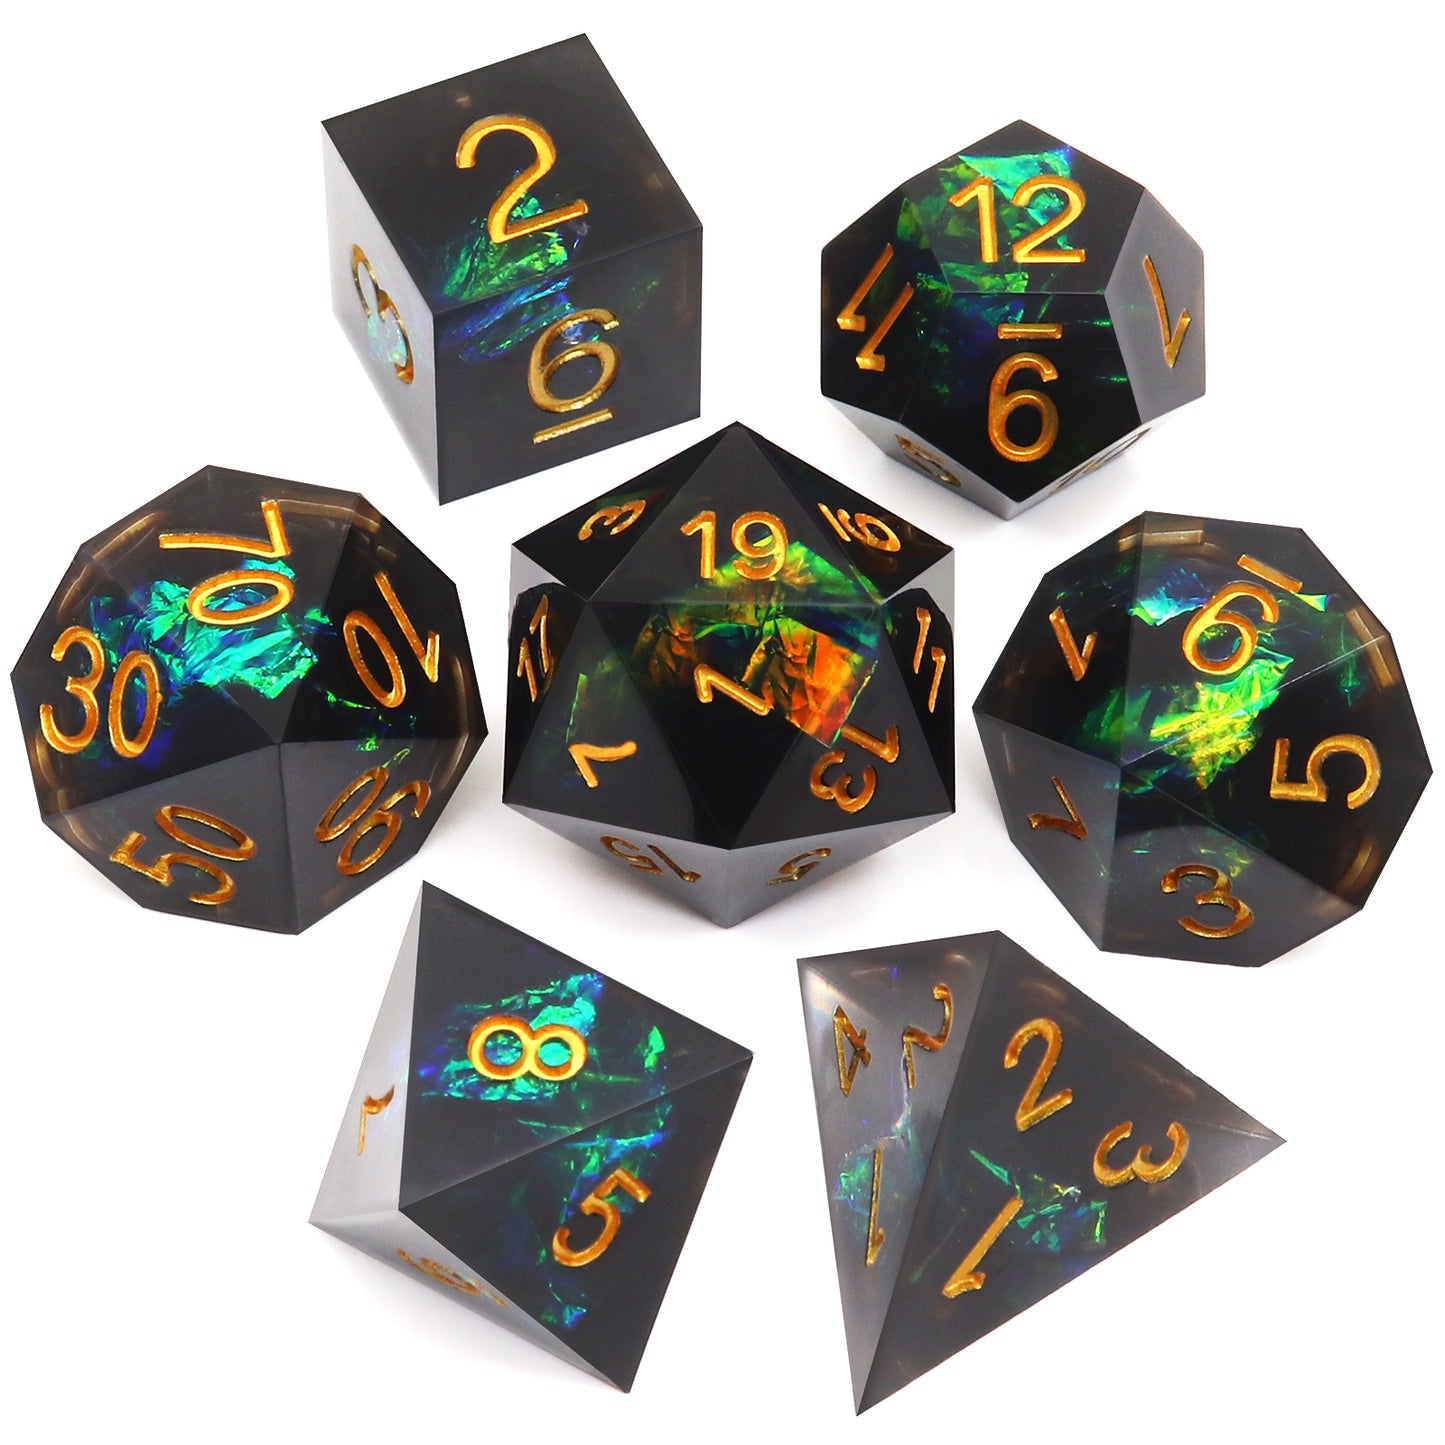 Haxtec Sharp Edge Resin Dice with Dice Case Black Iridecent D&D Dice for RPG Dungeons and Dragons Black Galaxy